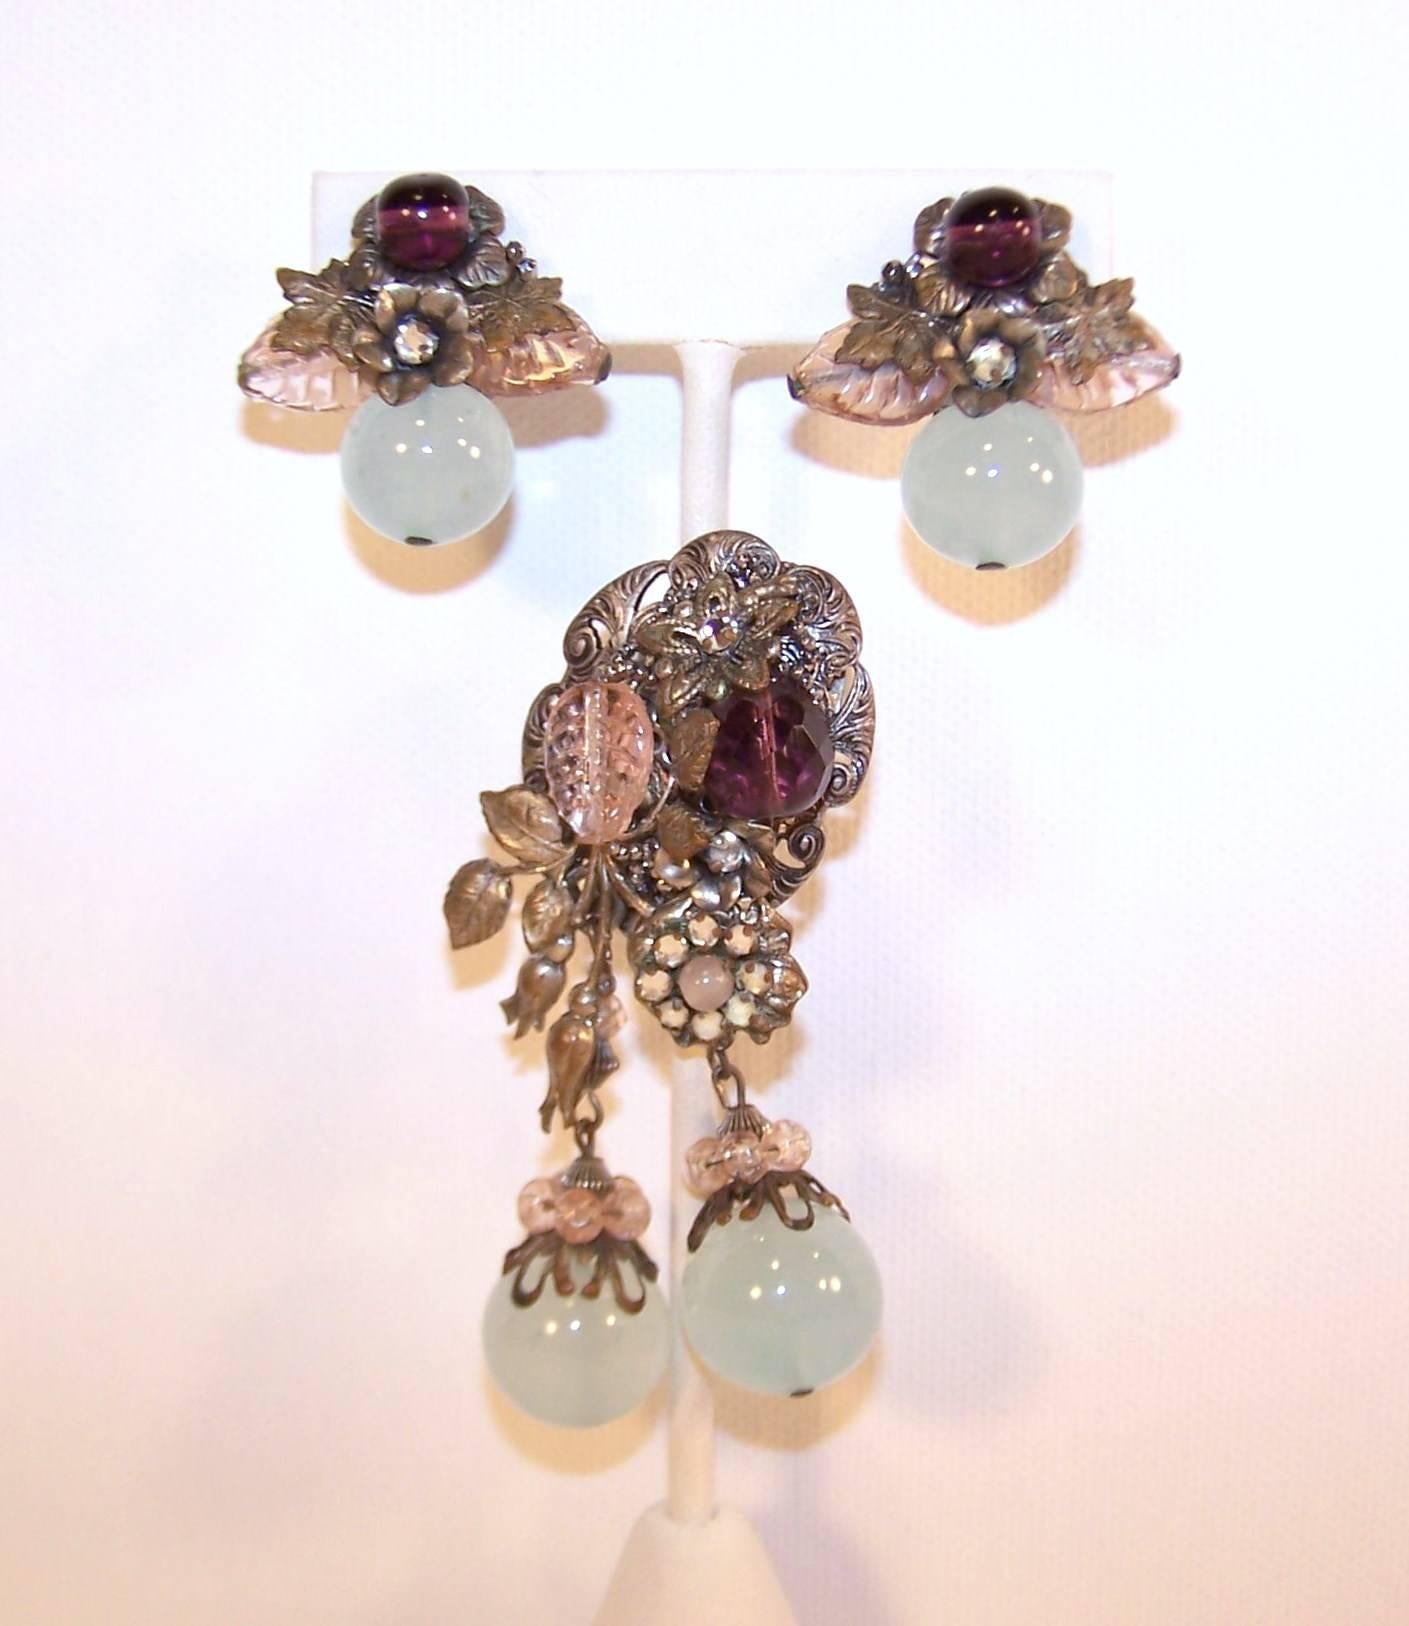 This striking early 1930's set by Miriam Haskell combines the delicate color combination of sea mist, amethyst and flesh-tone pink and a lovely filigreed silver tone metal to create an ethereal accessory which will add vintage charm to a modern